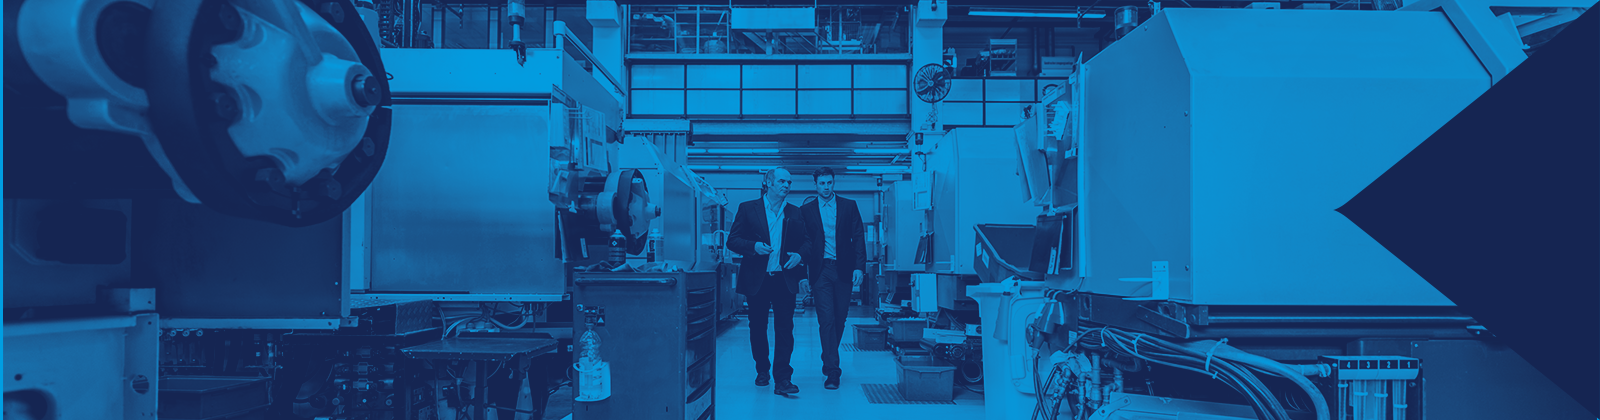 Two People Walking Through an Injection Molding Facility